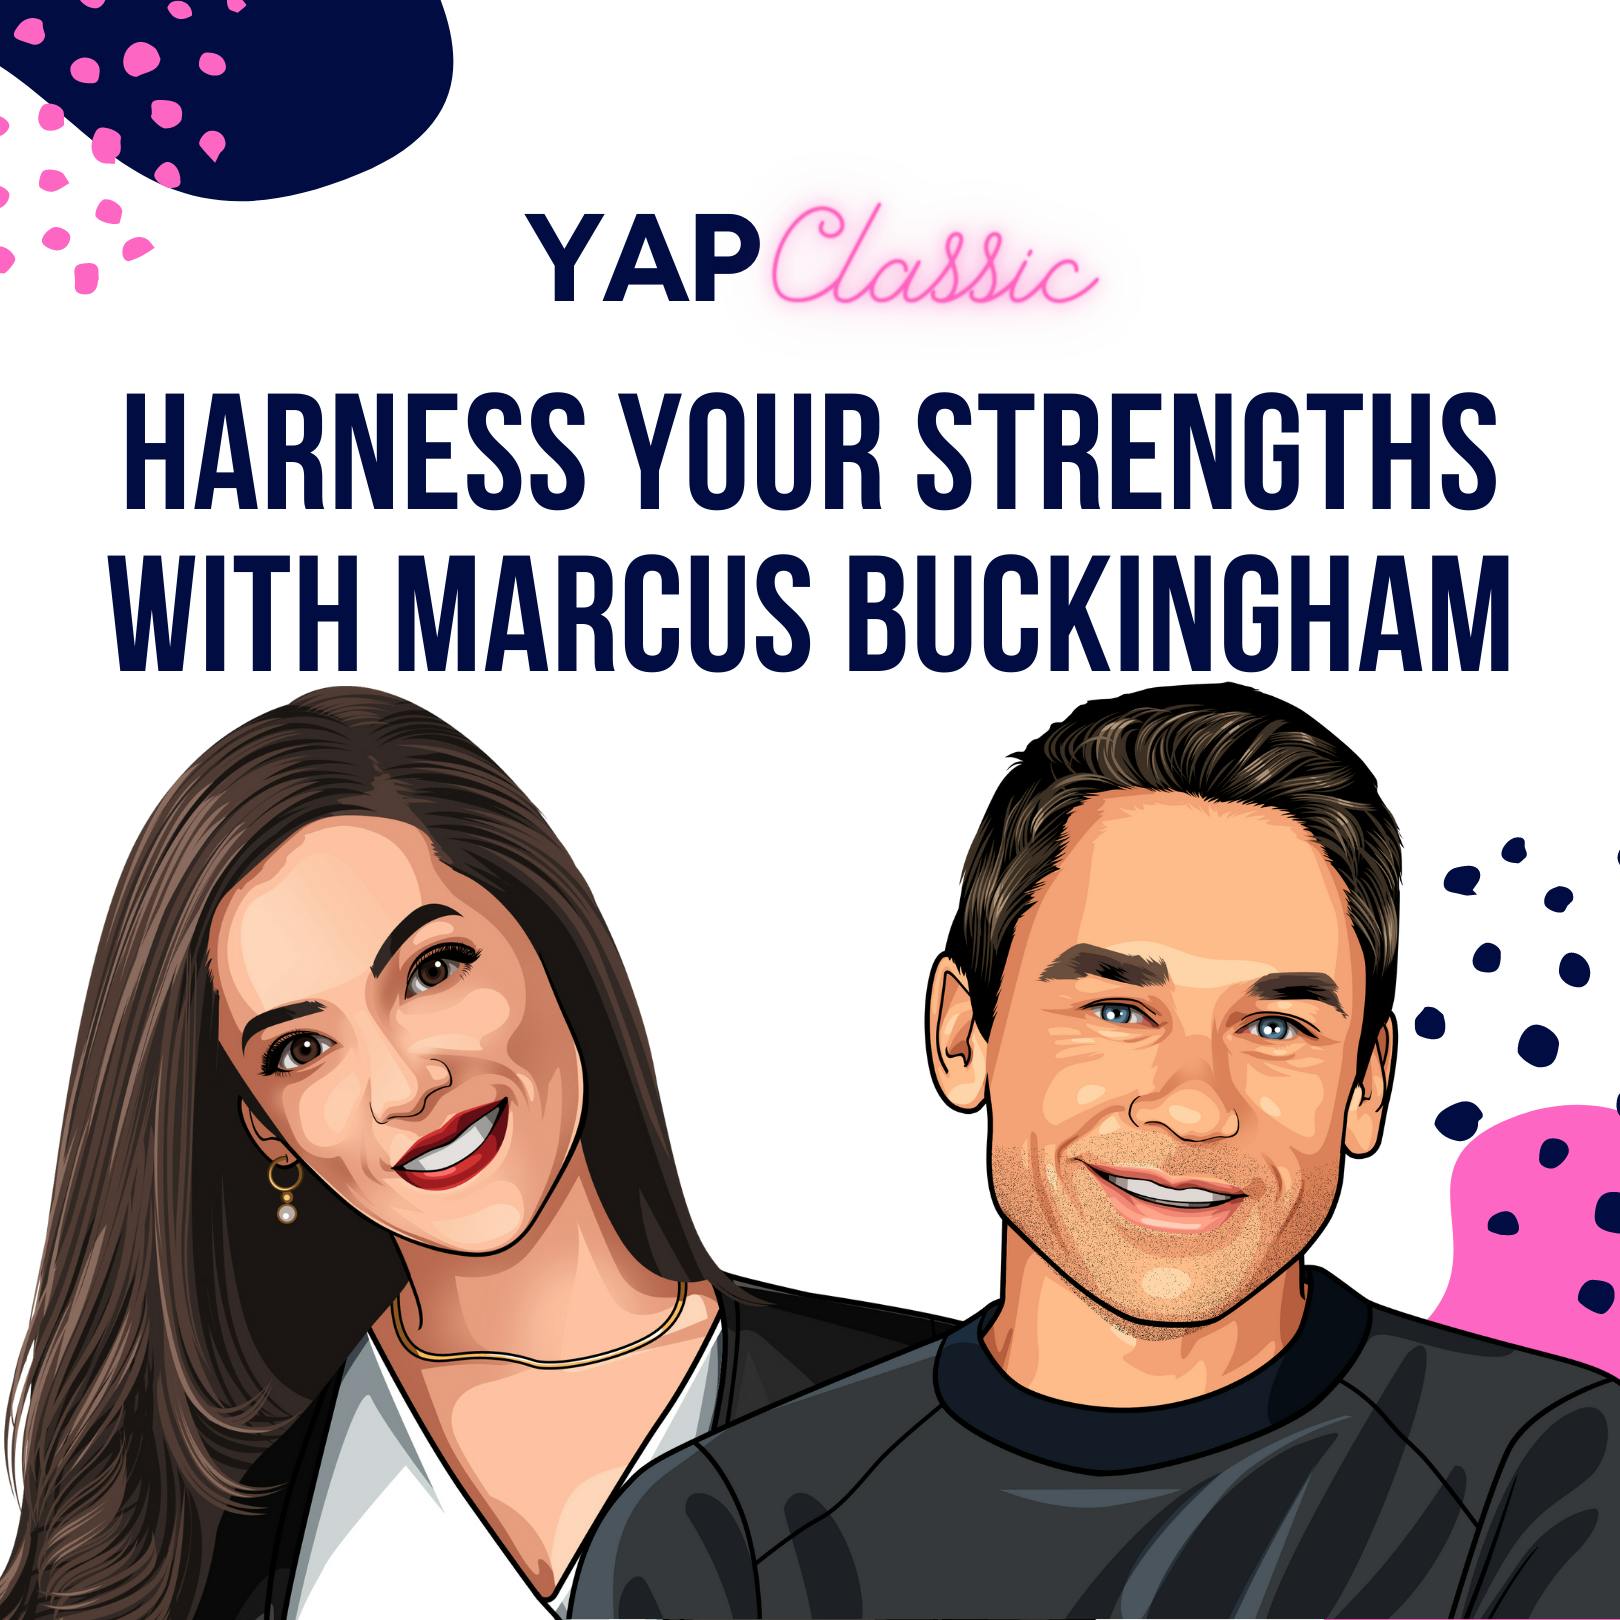 #YAPClassic: Harness Your Strengths with Marcus Buckingham